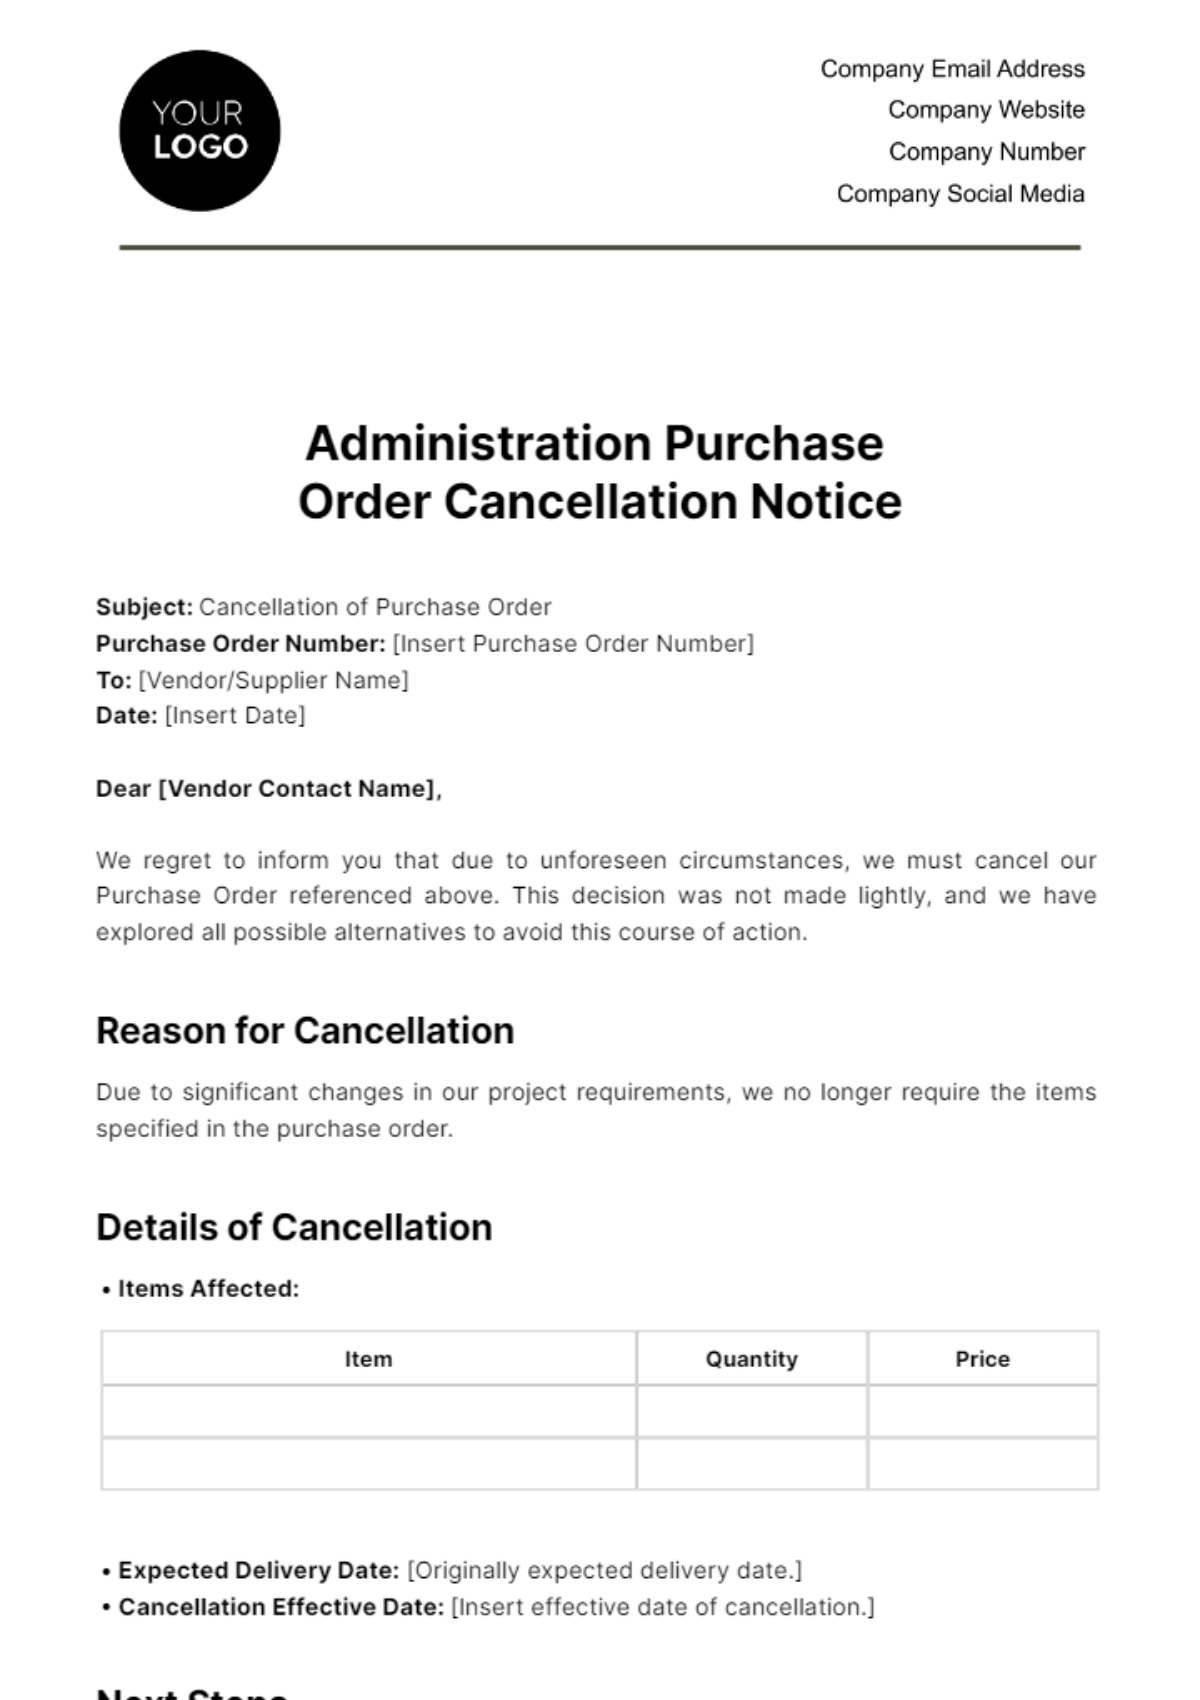 Free Administration Purchase Order Cancellation Notice Template